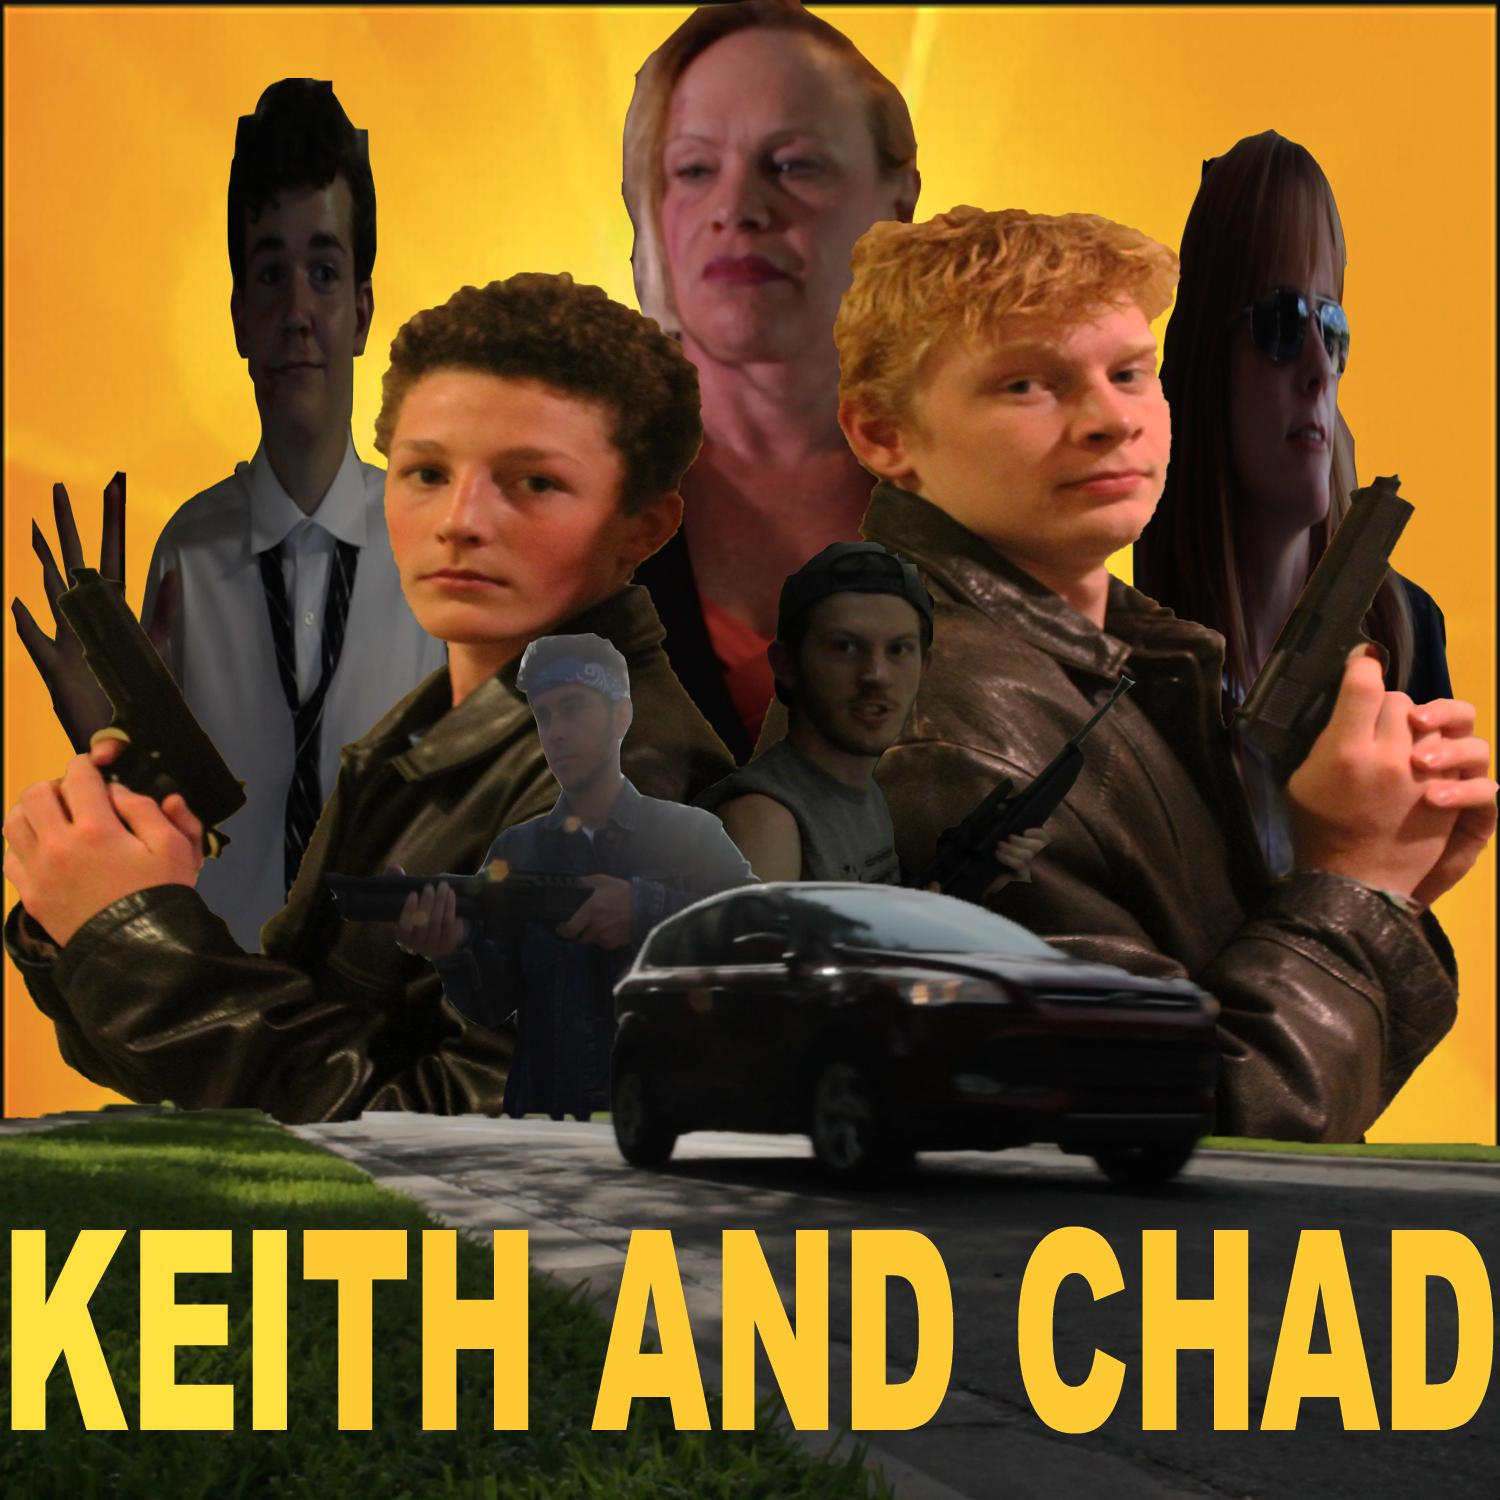 keith and chad action comedy movies